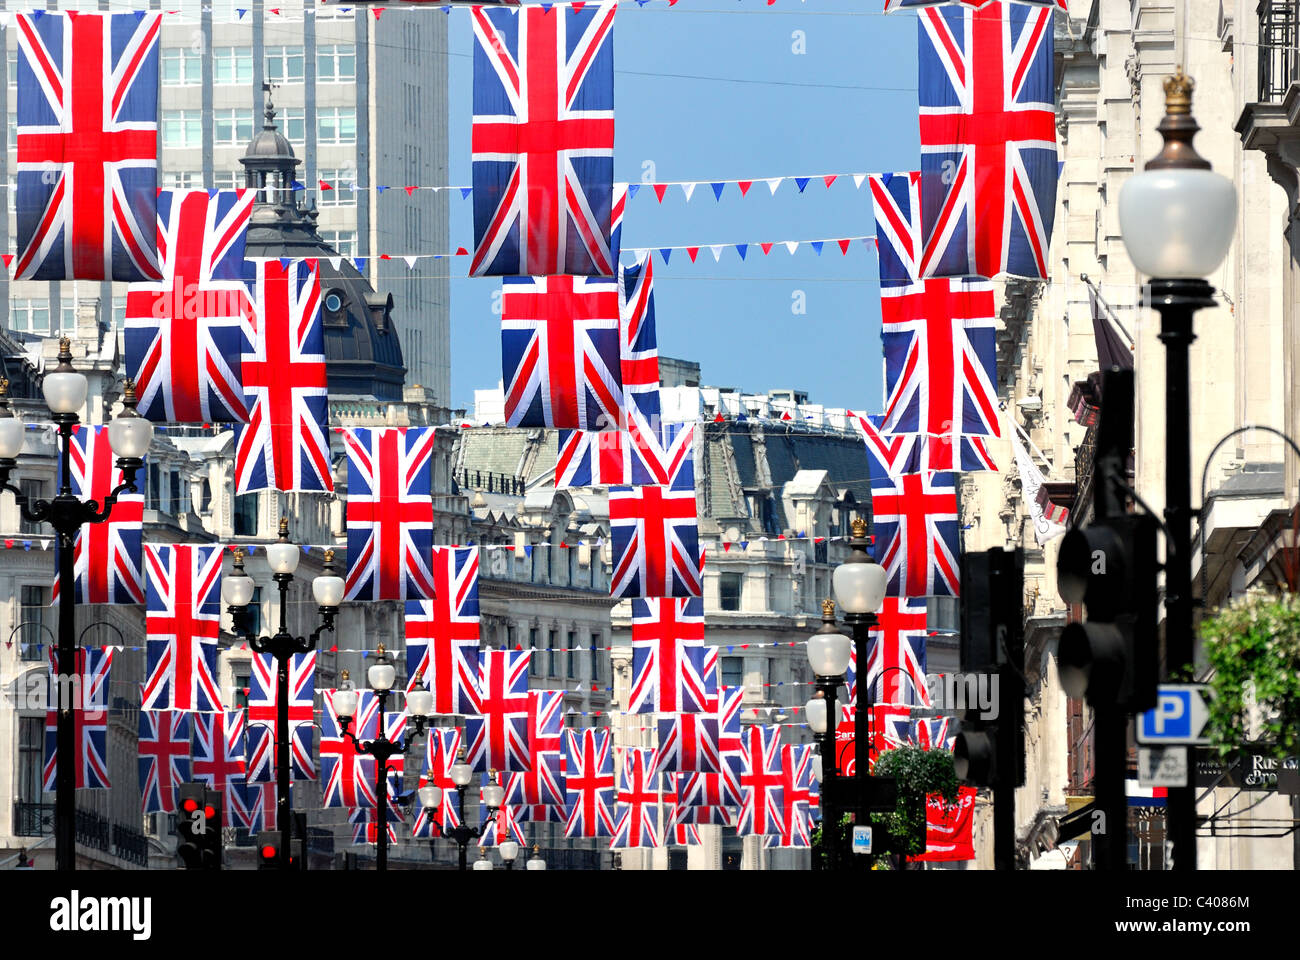 Regent Street London decorated with Union Jacks for the Royal wedding Stock Photo